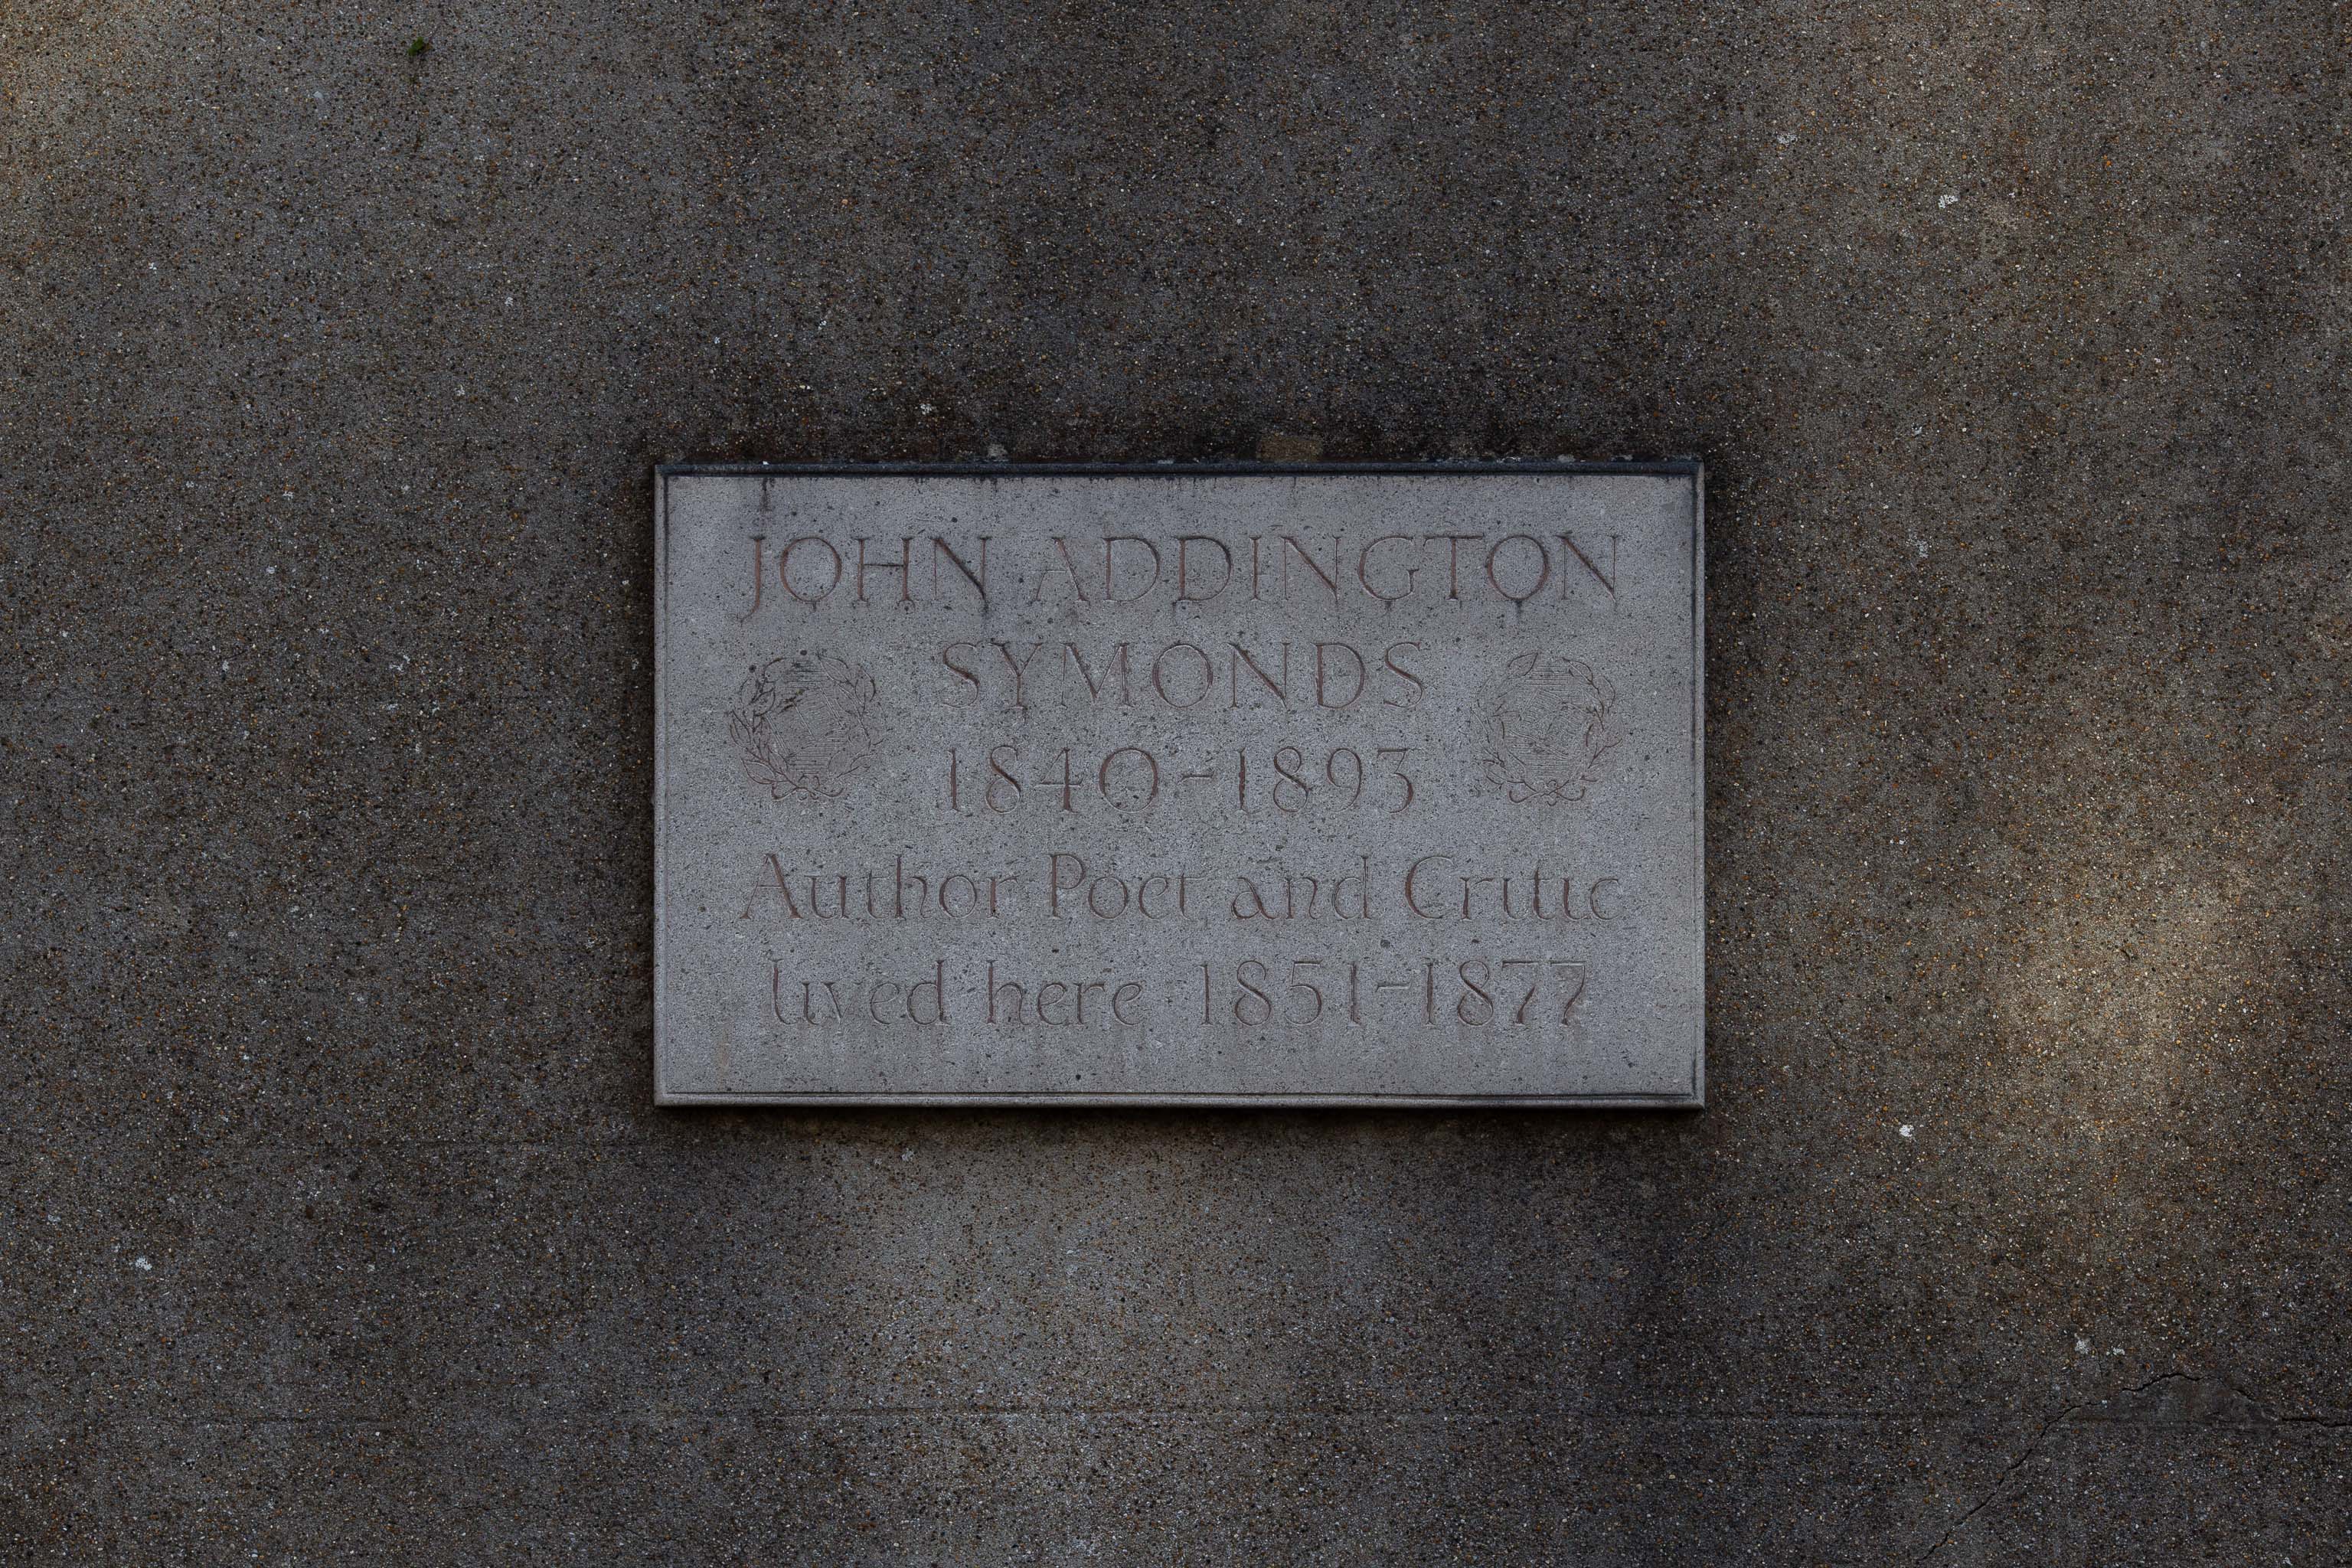 John Addington Symonds
He sounds... a little unusual. Just to be clear, it's the pederasty I'm frowning at, not the homosexuality.
